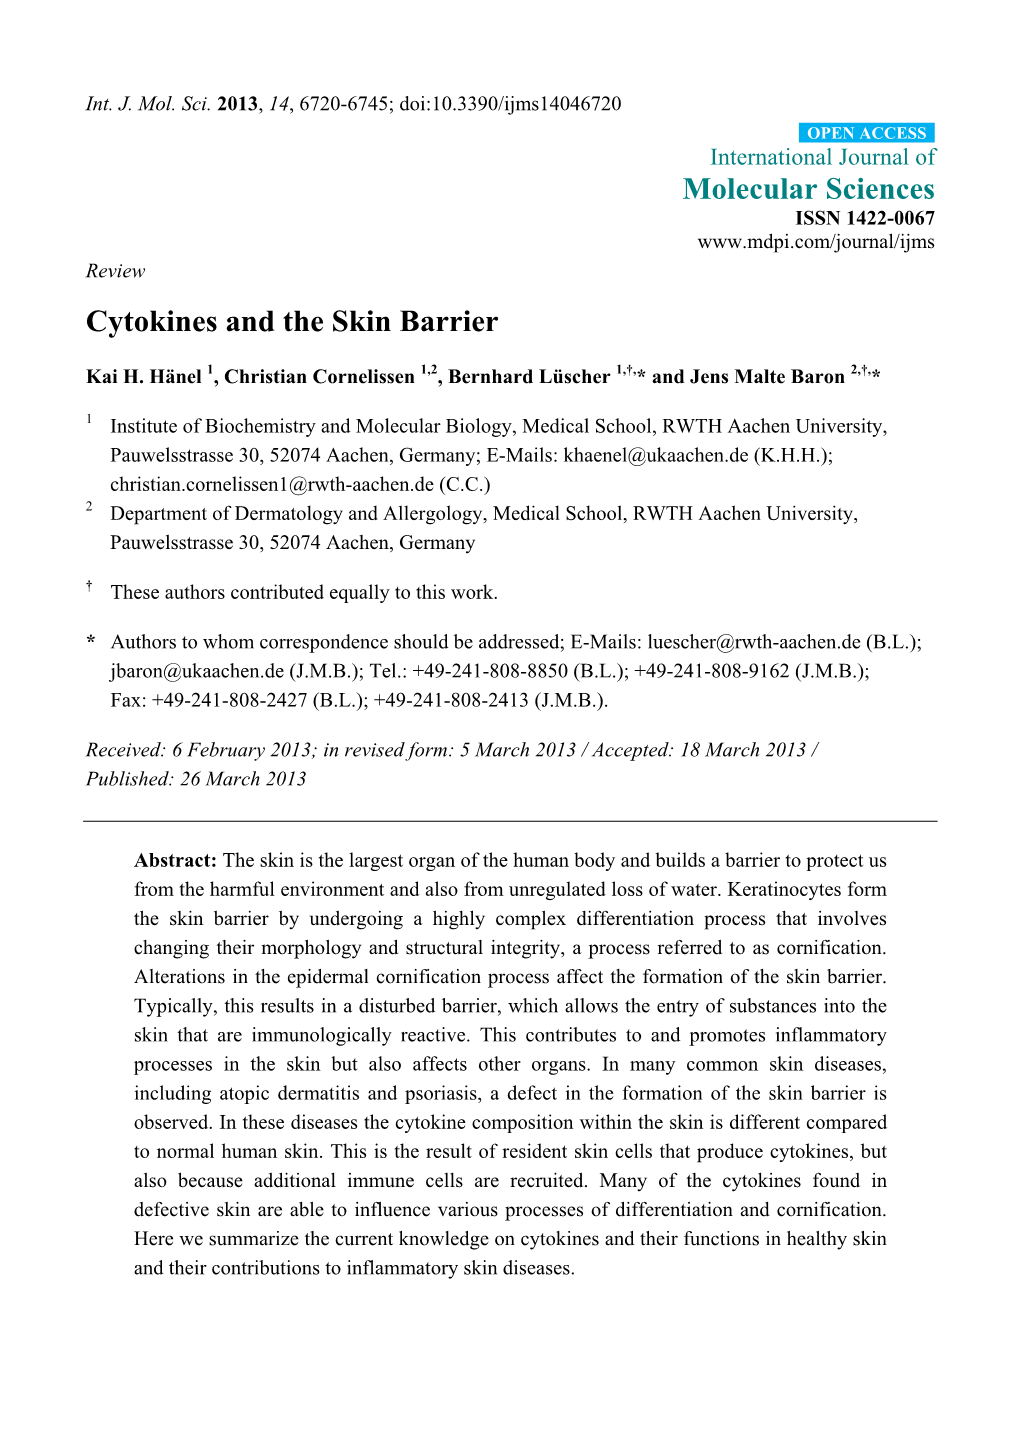 Cytokines and the Skin Barrier